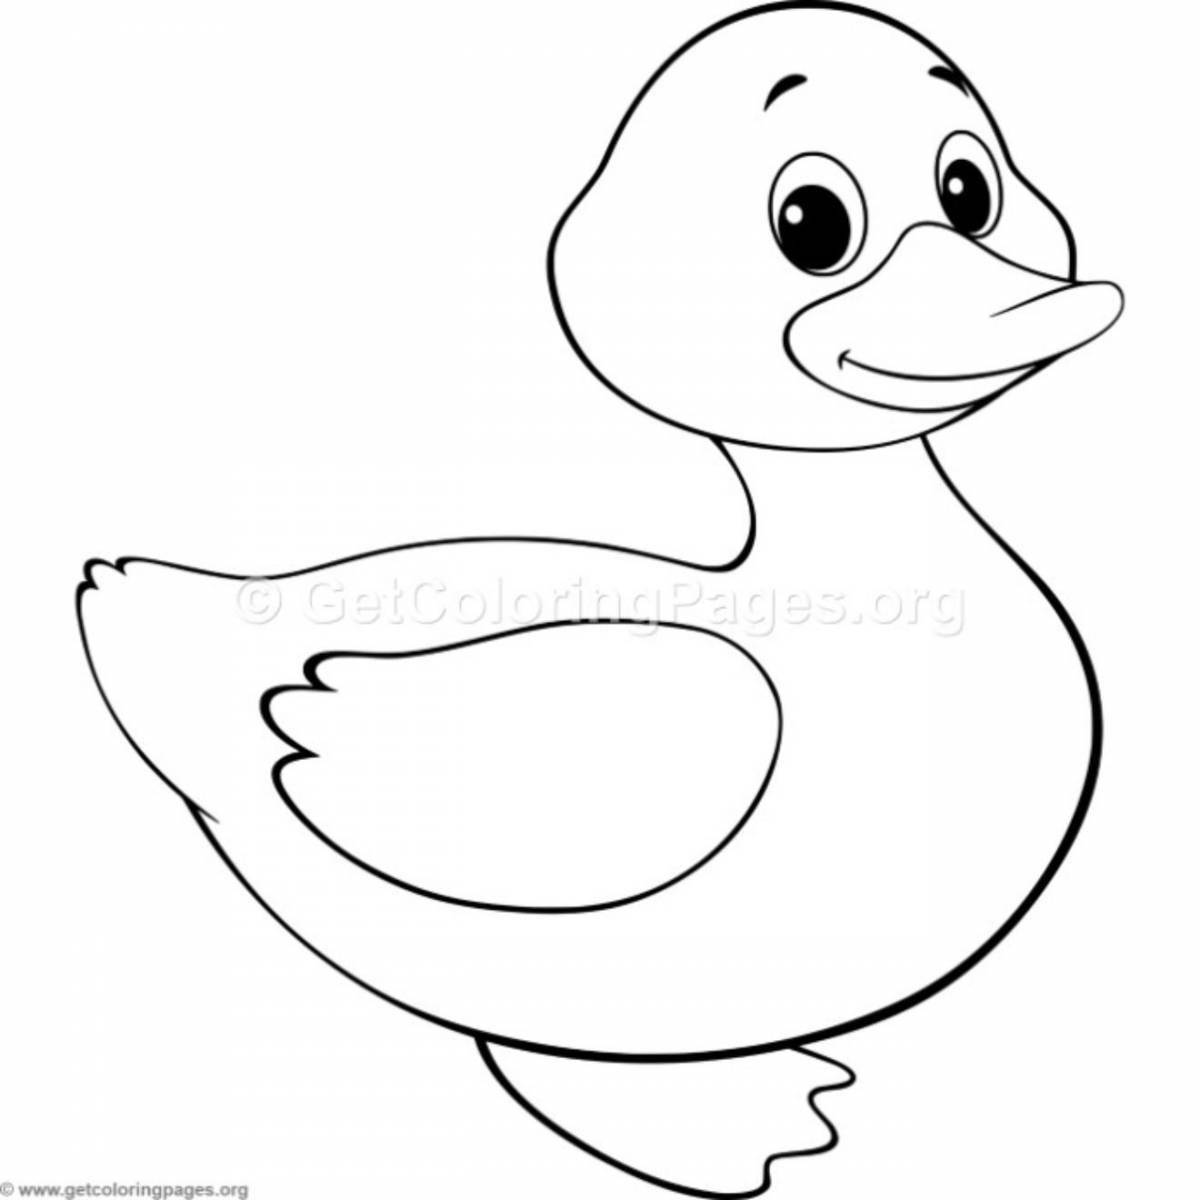 Attractive duck coloring book for kids